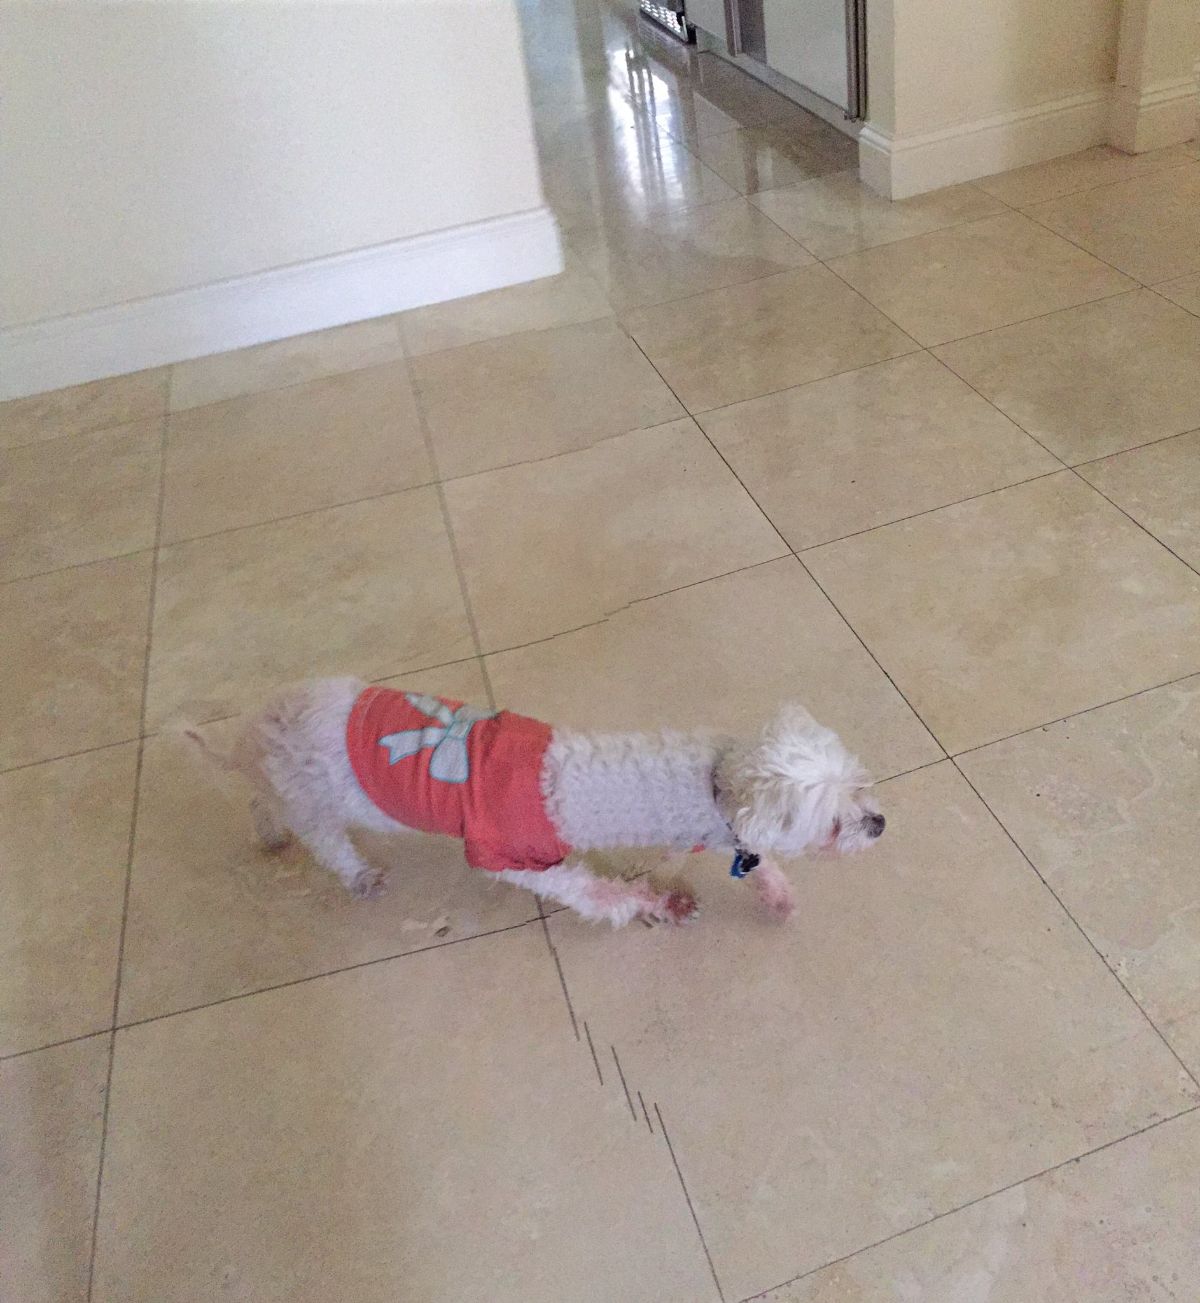 panoramic fail of white dog walking on the floor wearing a red shirt has a long neck